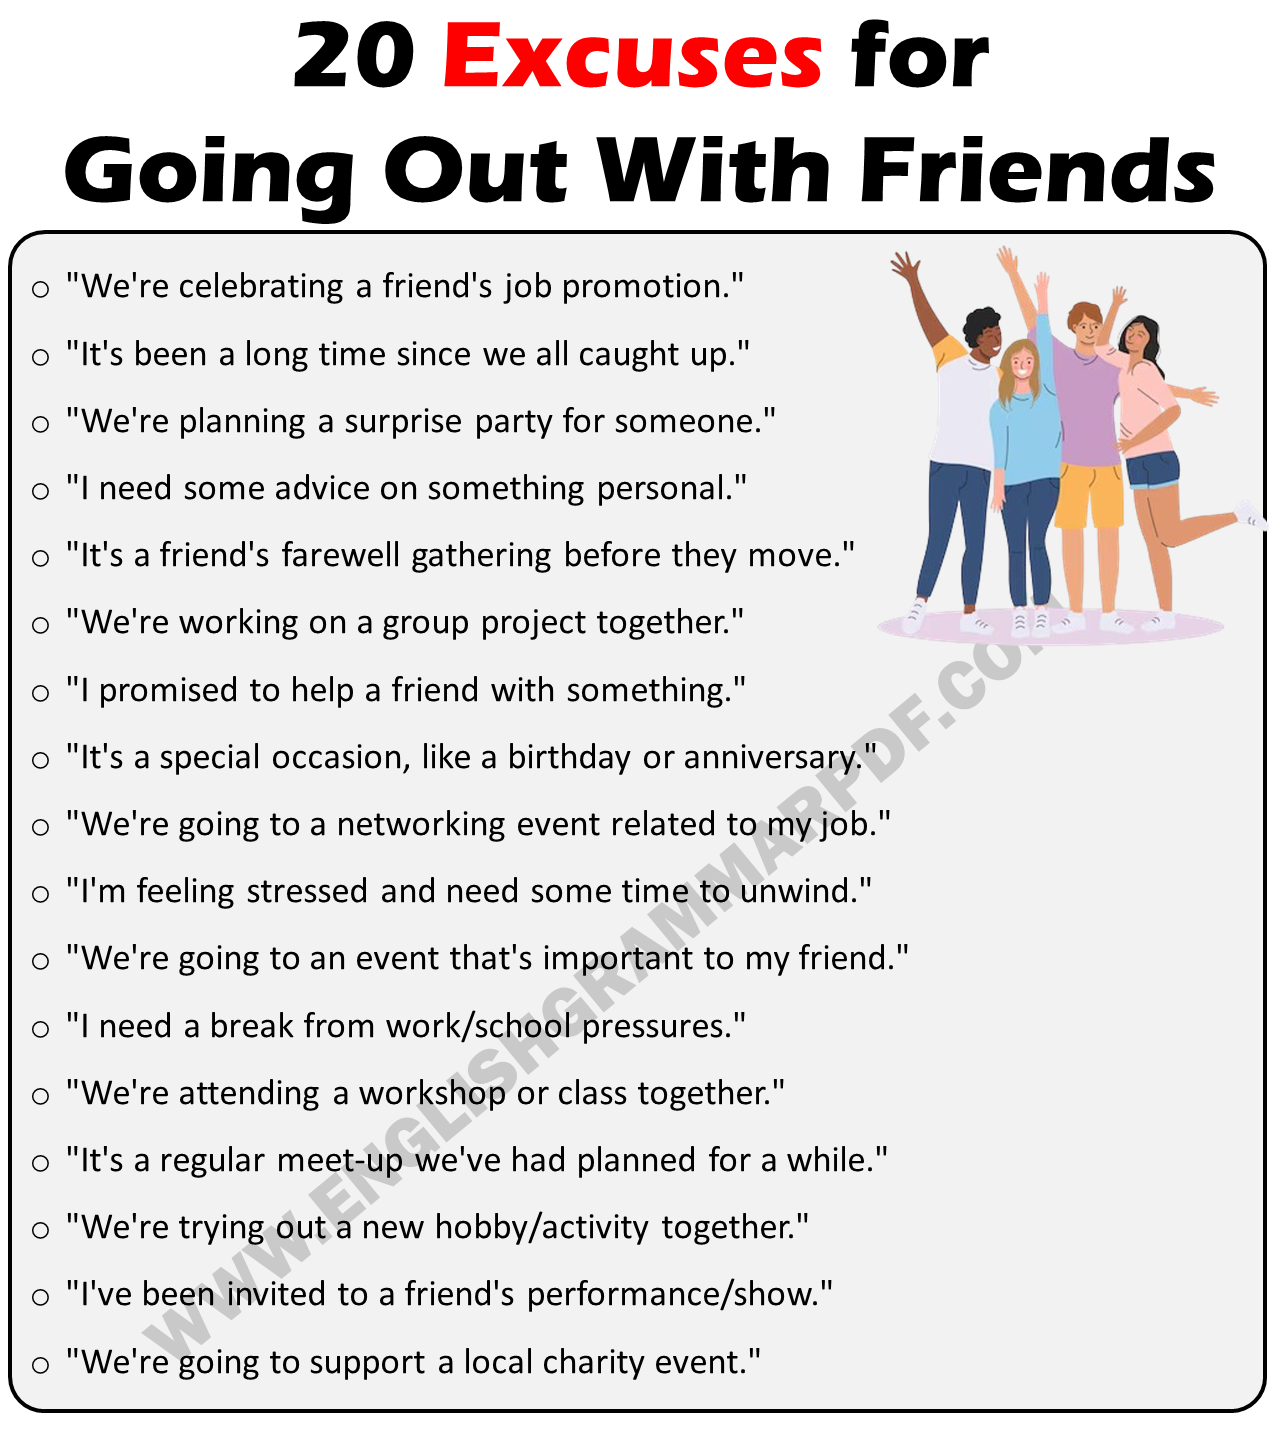 20 Excuses For Going Out With Friends